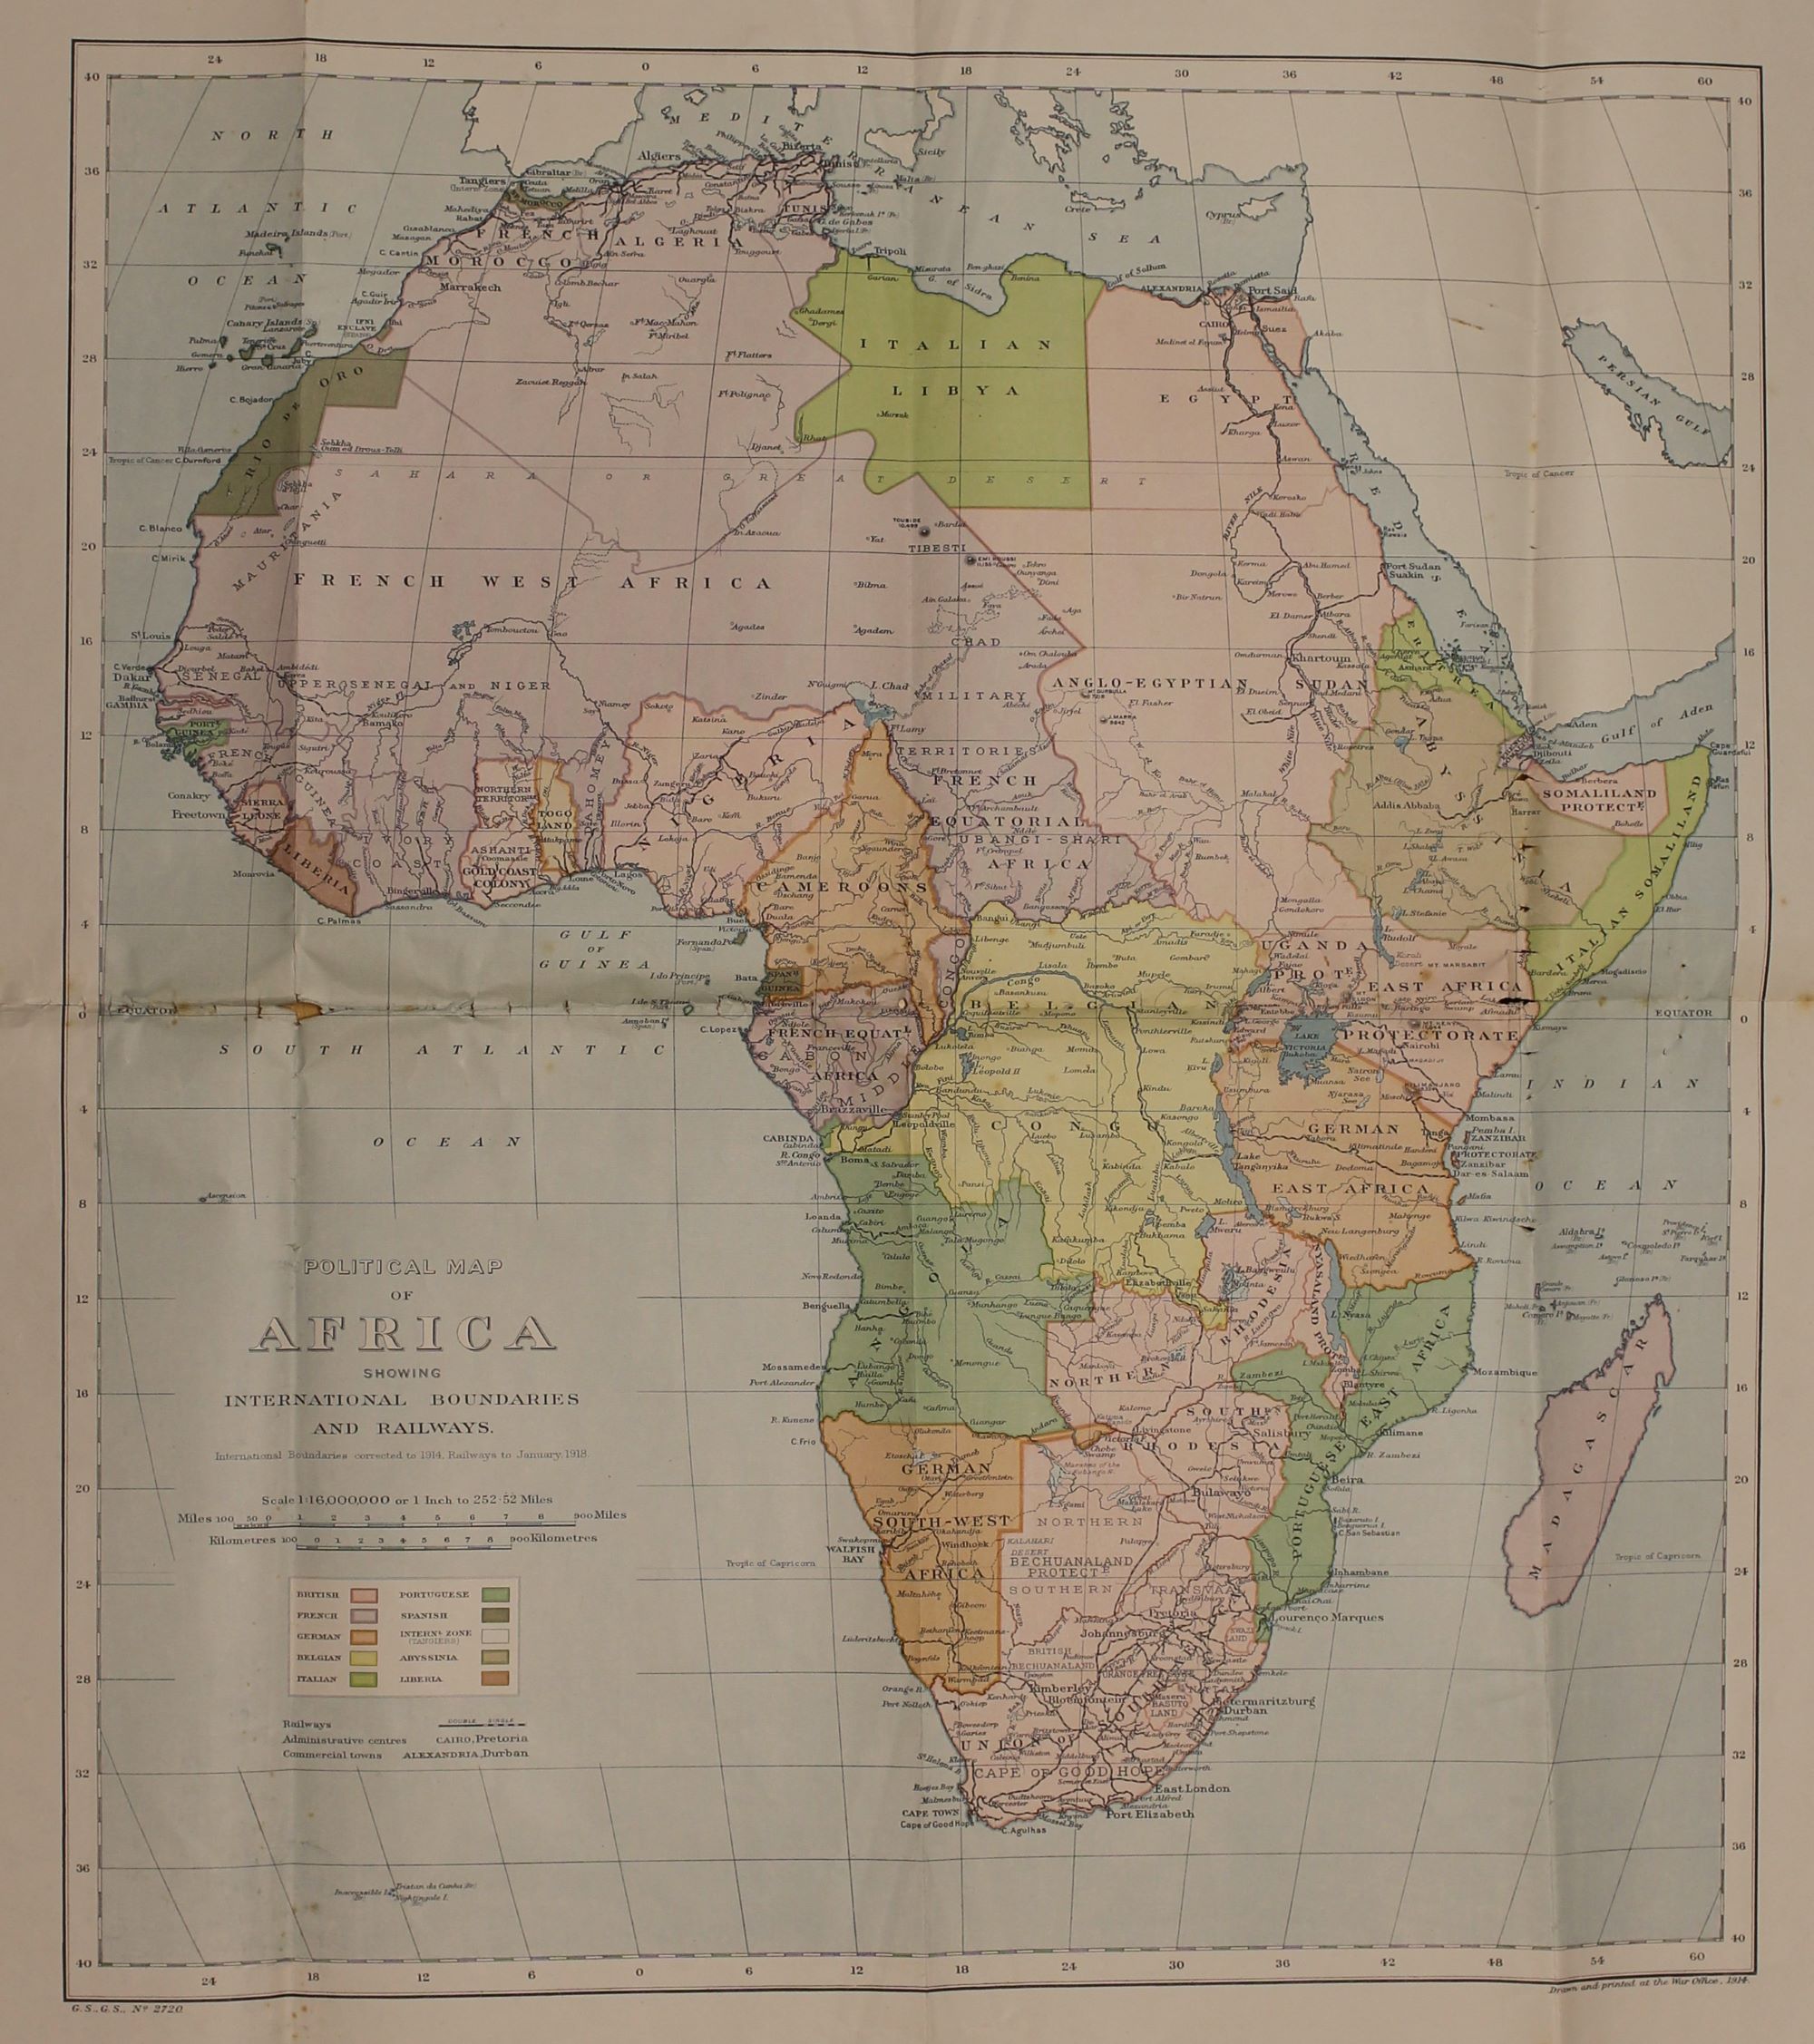 A historical map of Africa